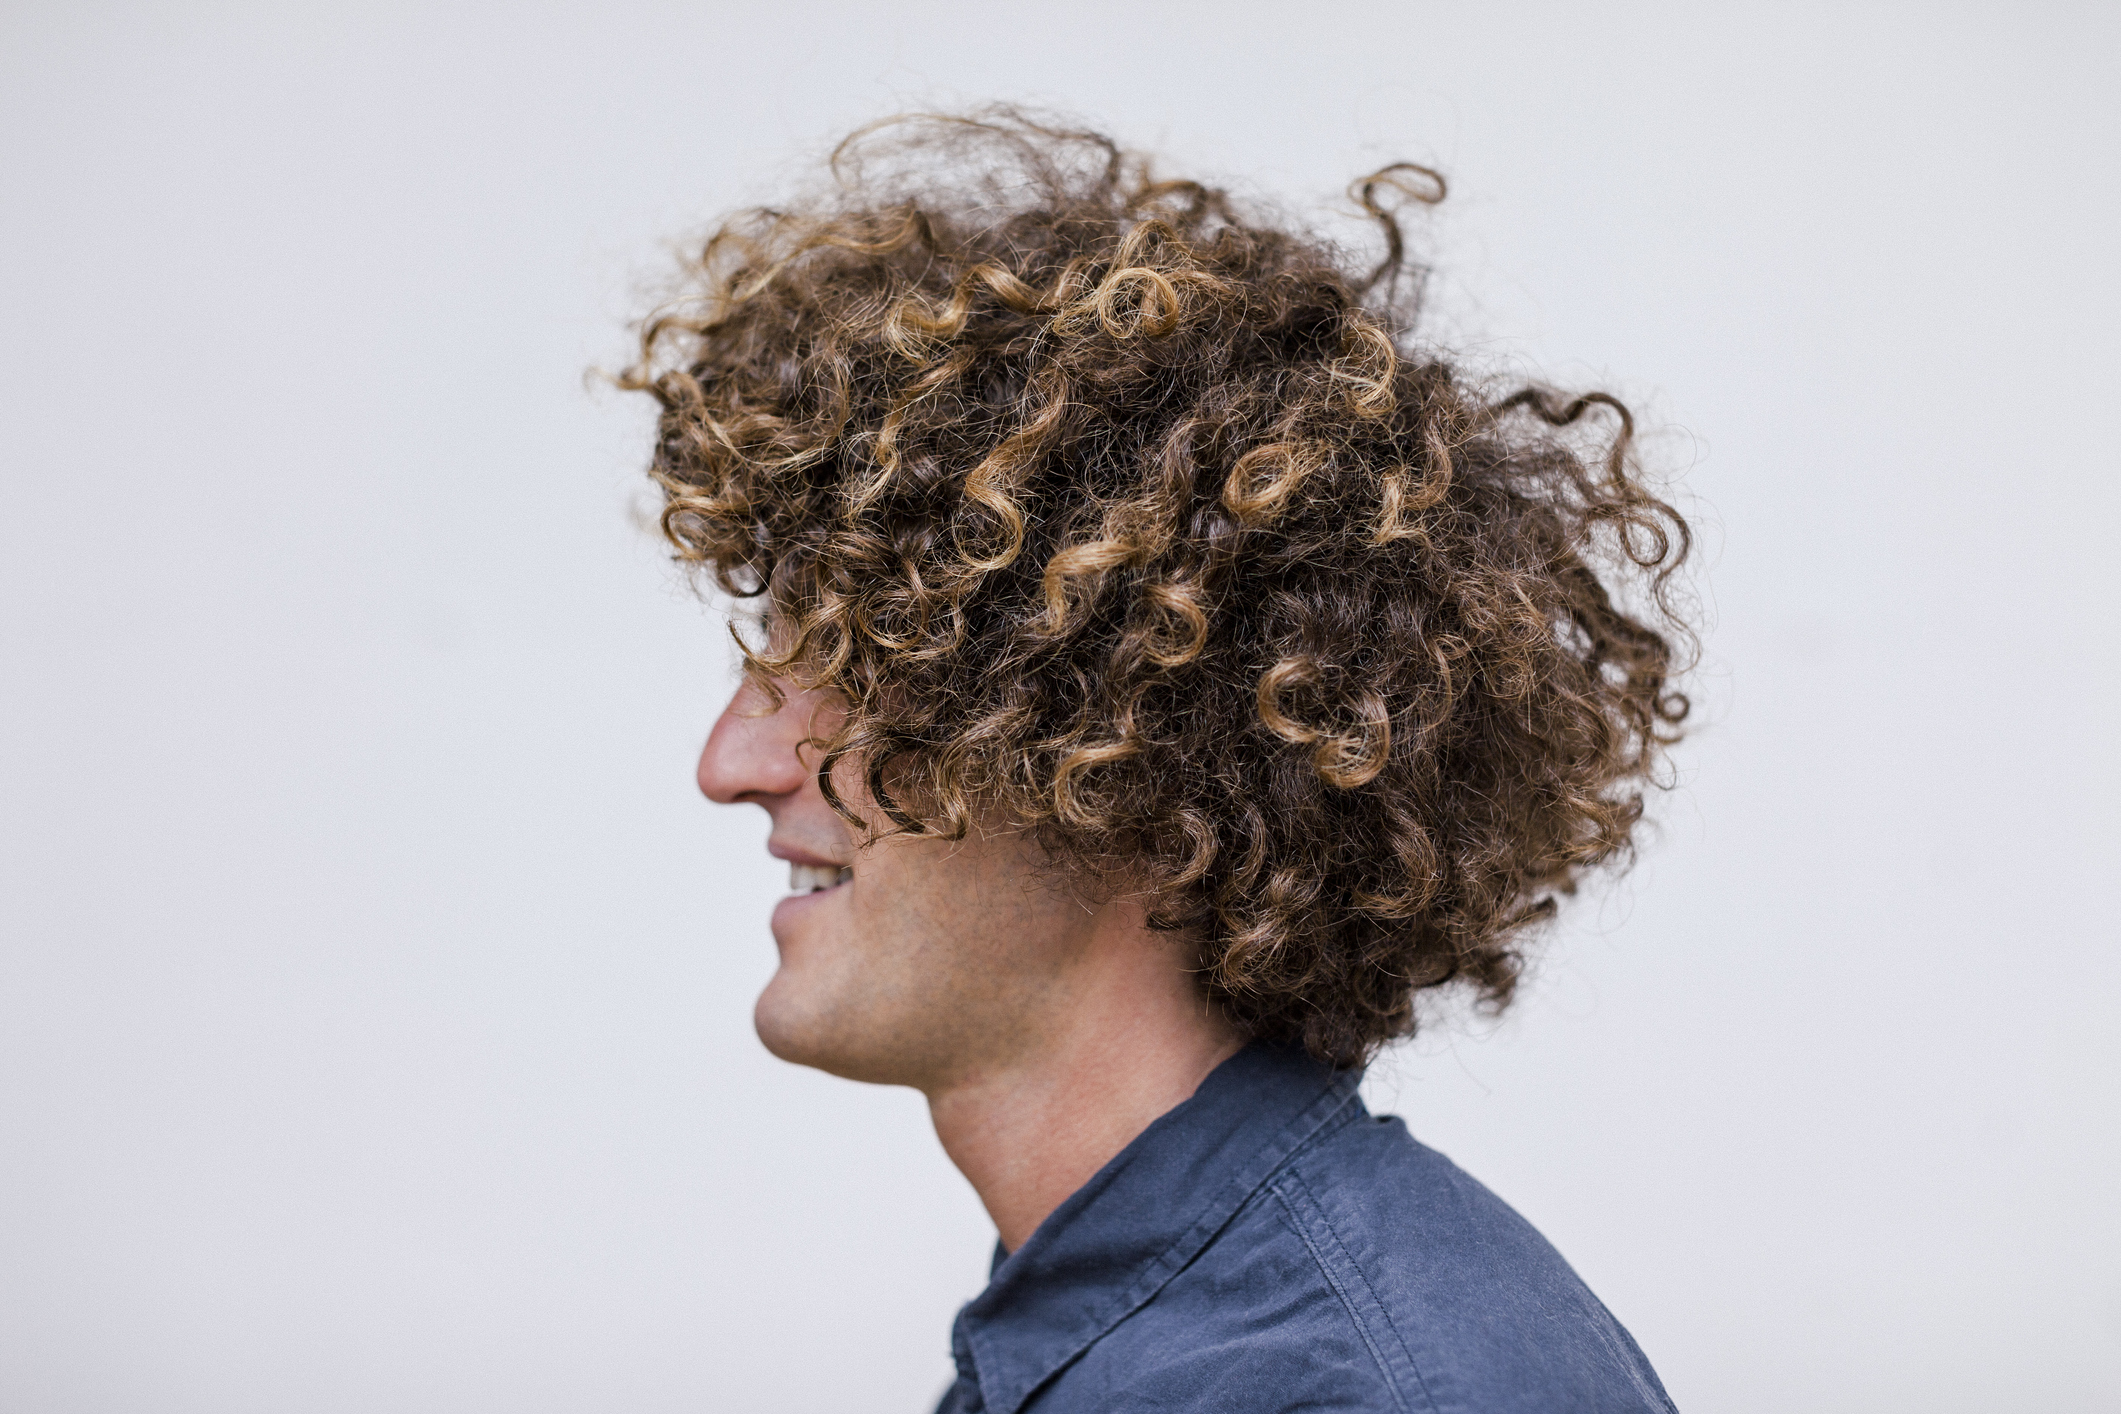 How To Get And Style Curly Hair Men Like To Sport | LoveHairStyles.com